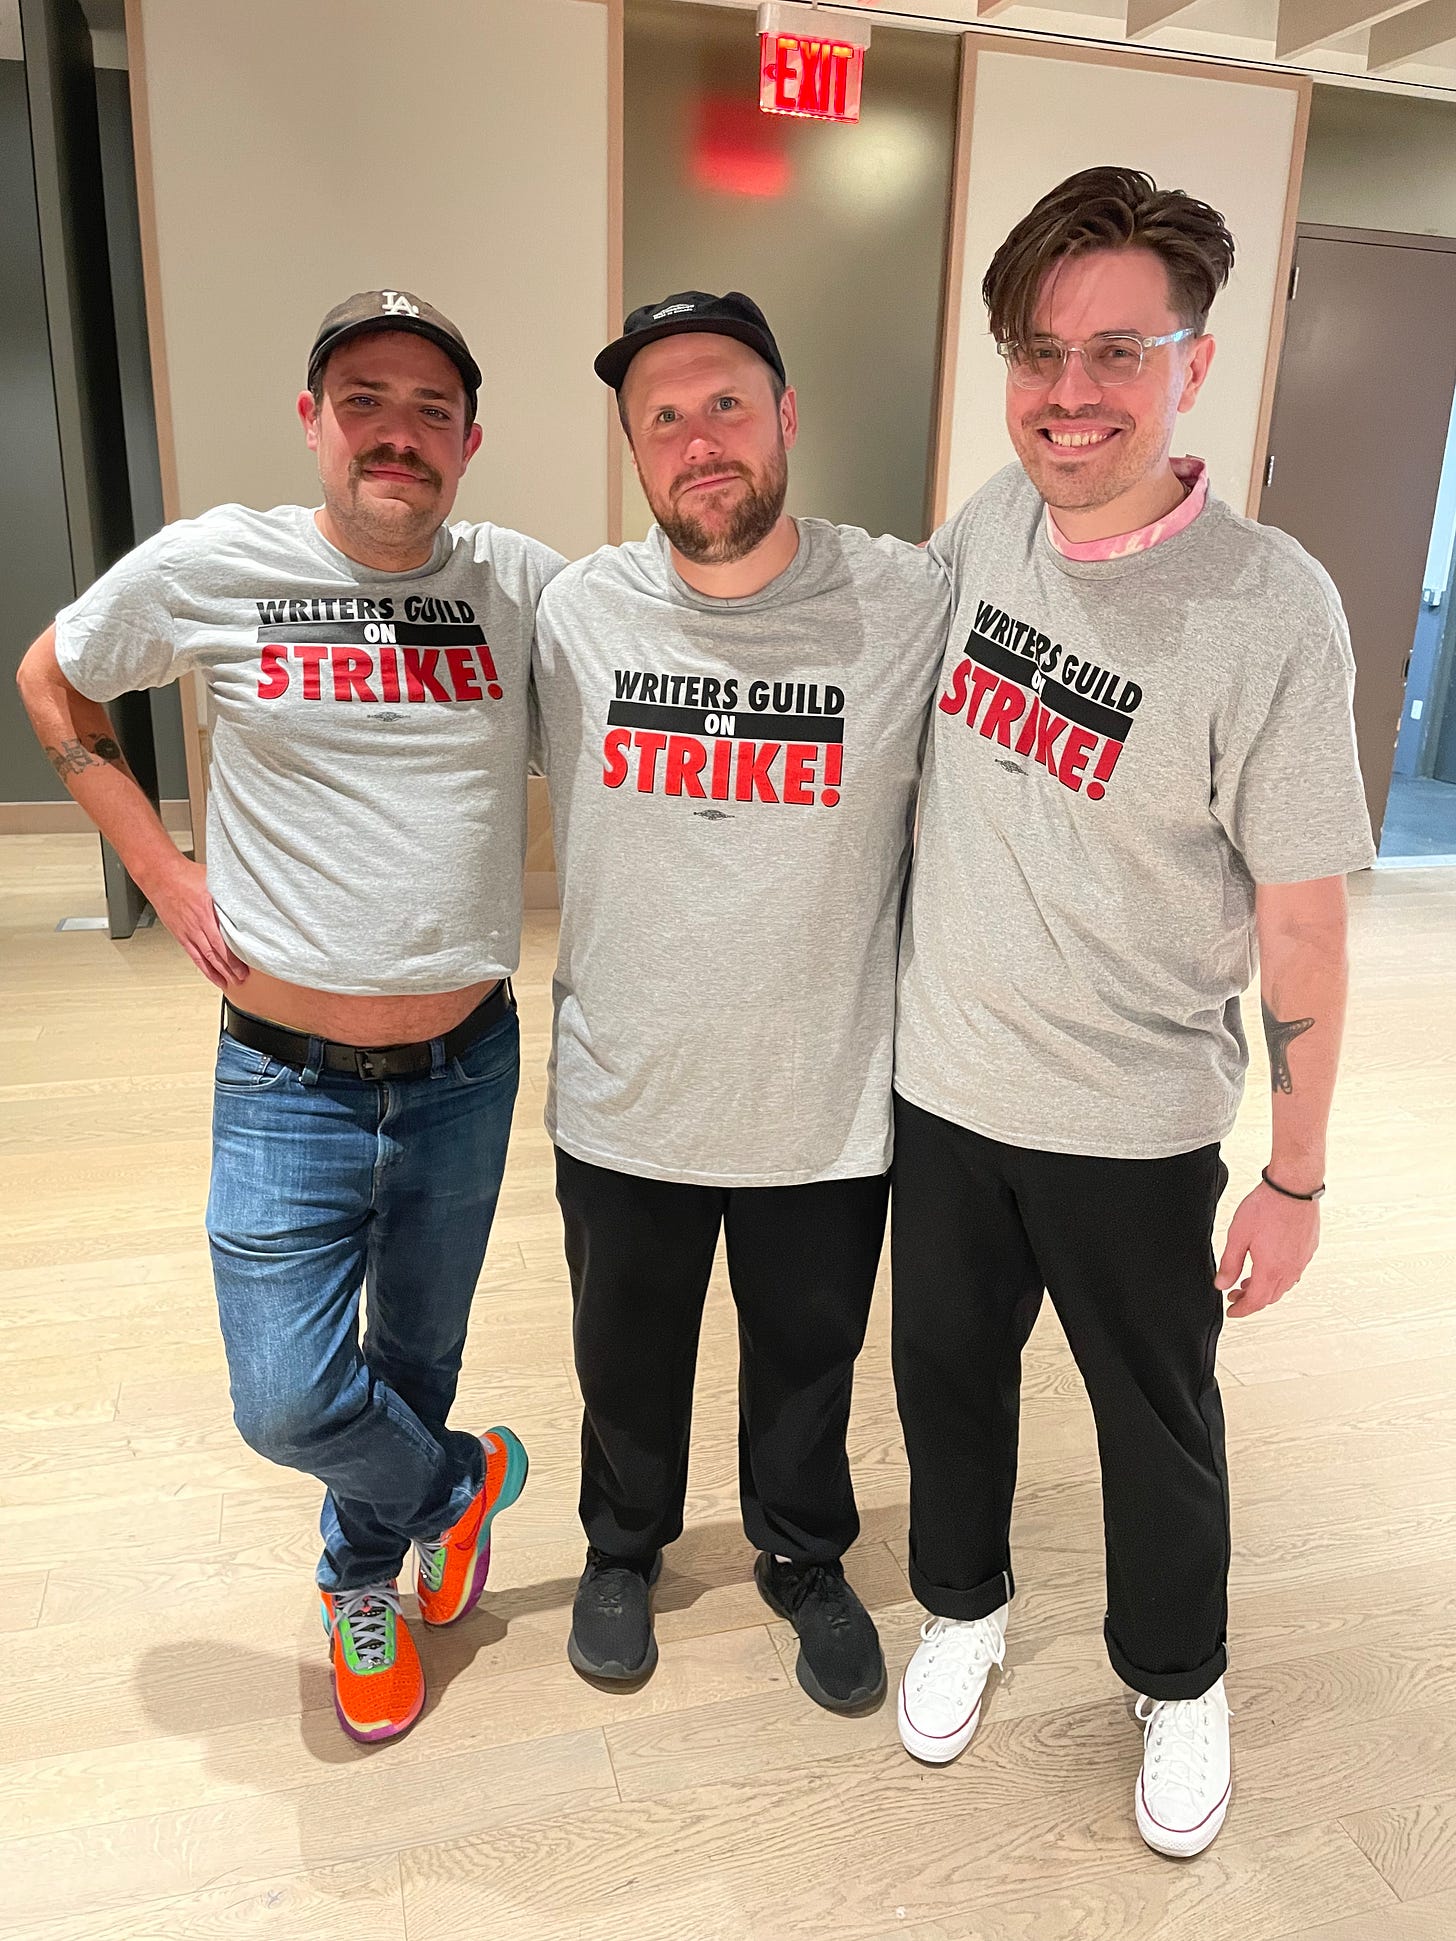 Zack and Steve from Pup along with Jeff Rosenstock wearing WGA strike t-shirts, like champs.